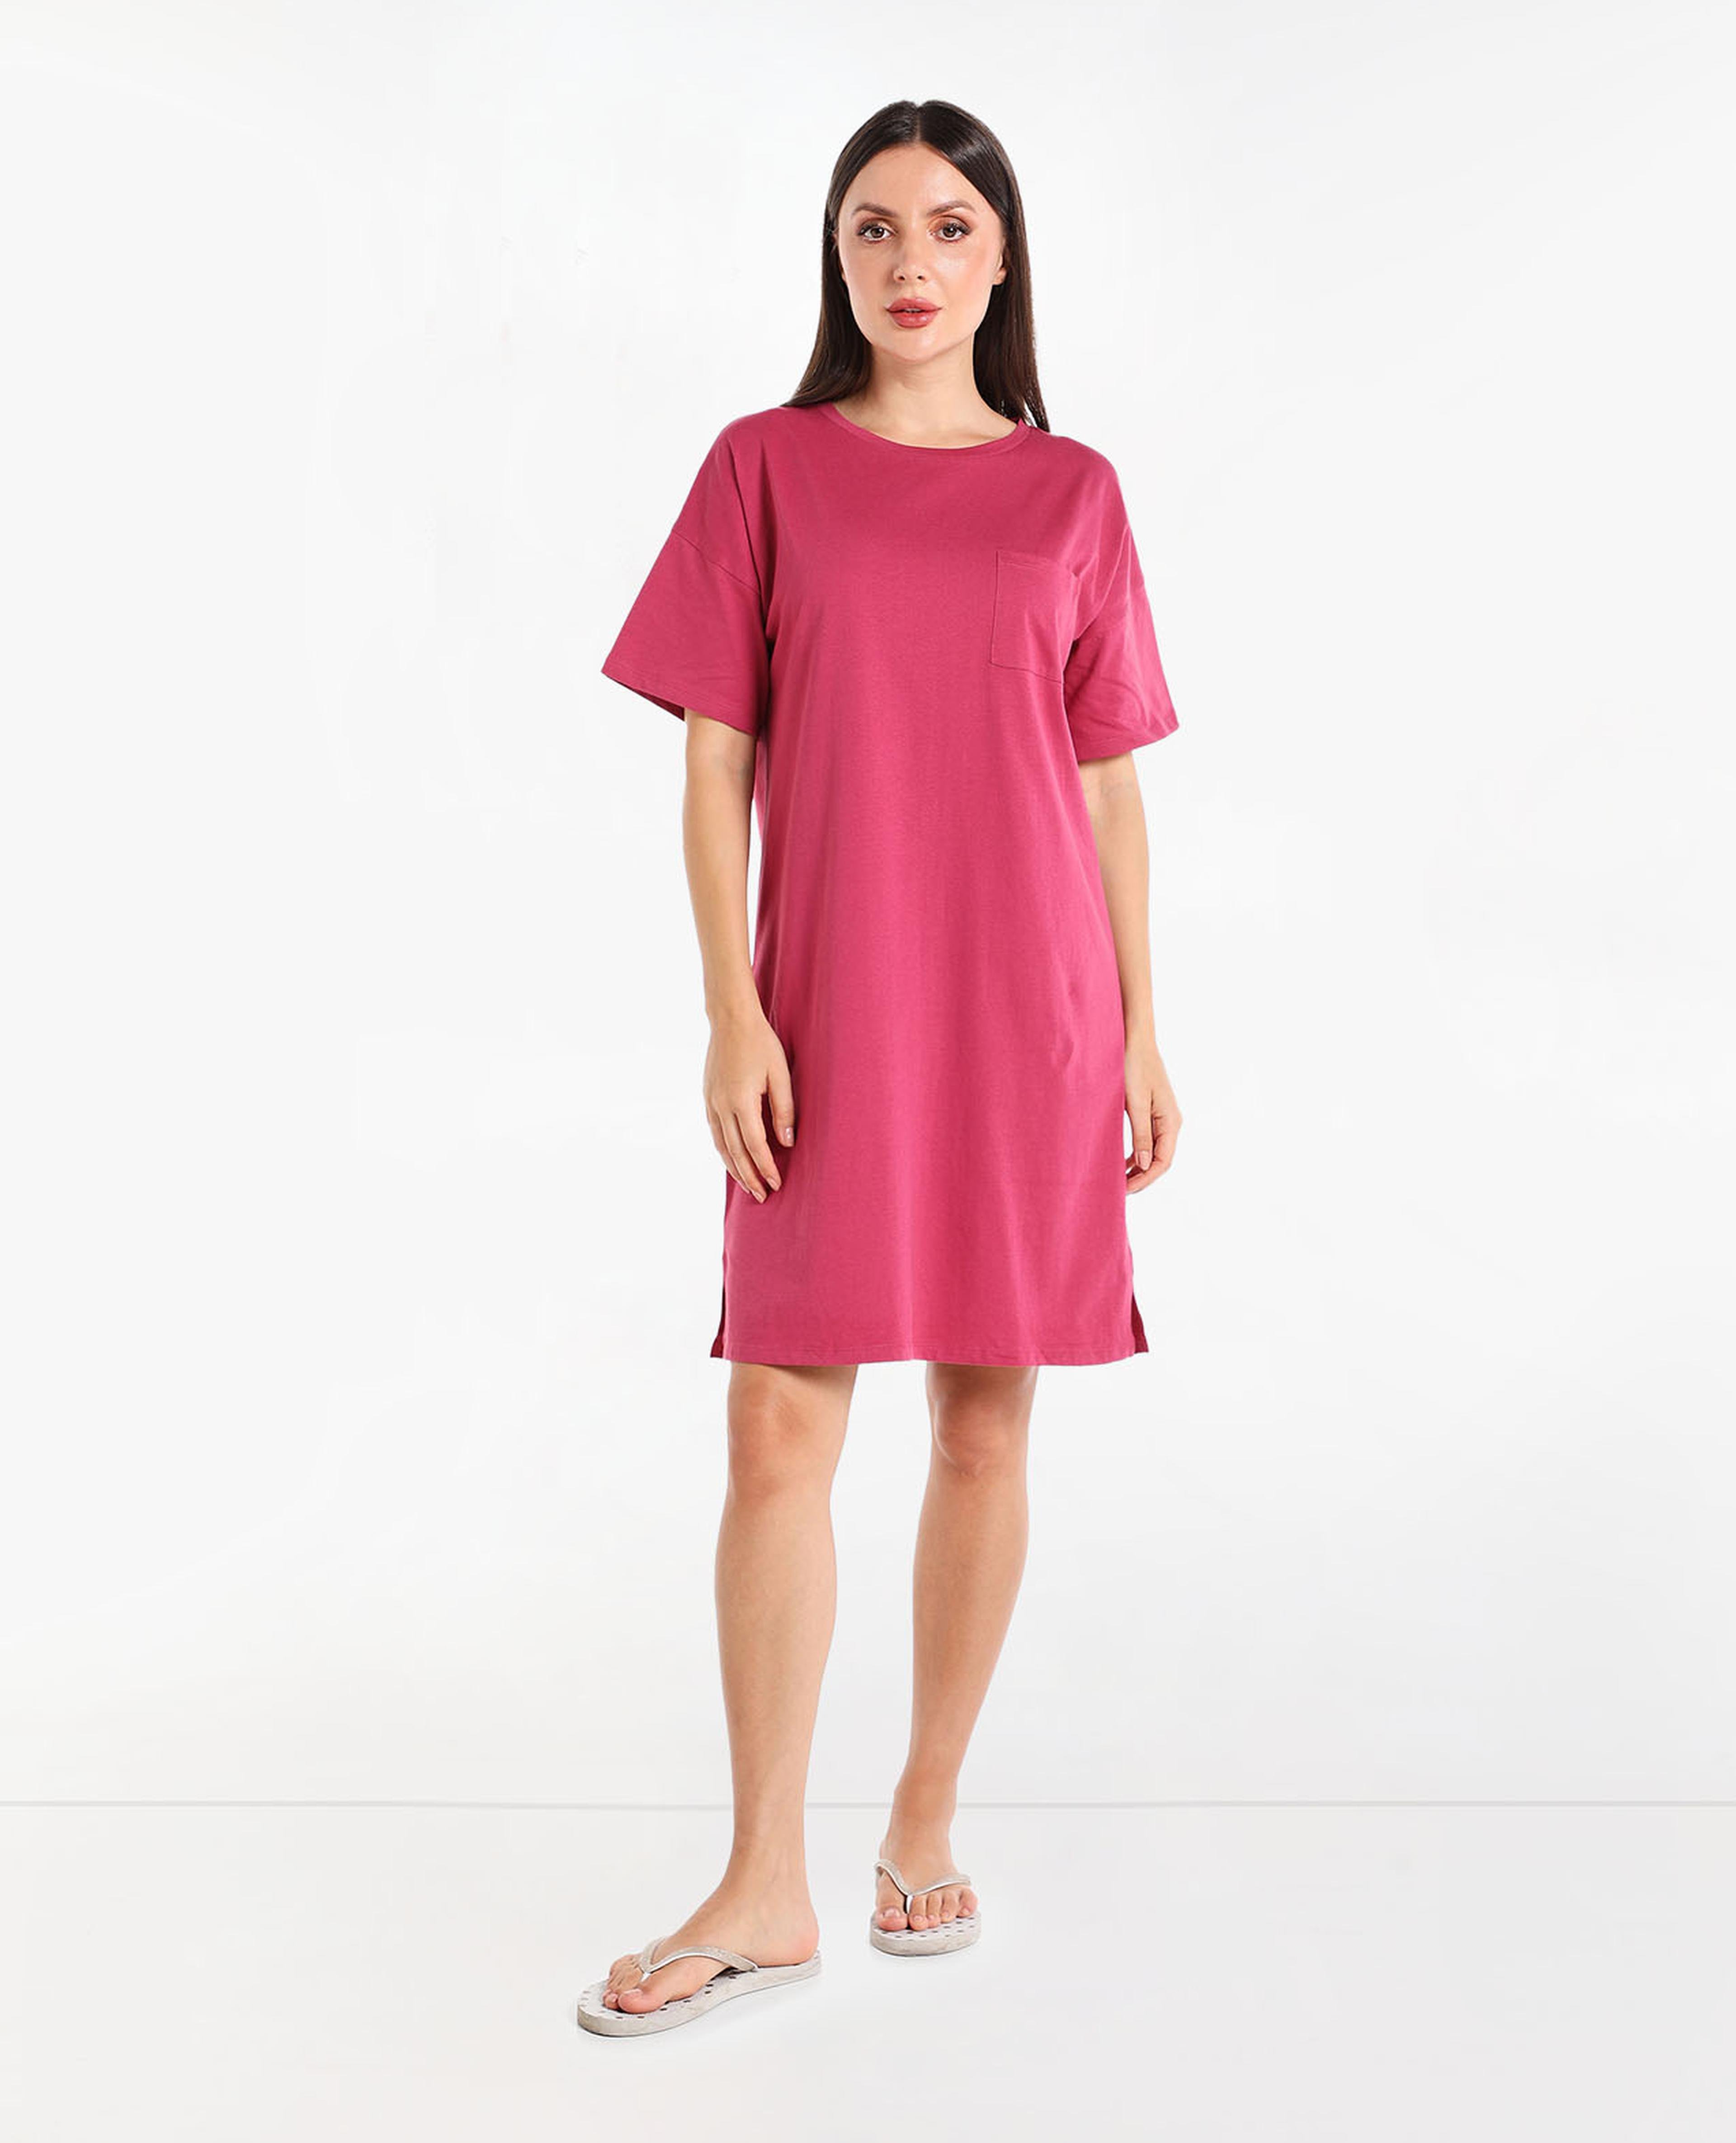 Solid Sleep T-Shirt with Round Neck and Drop-Shoulder Sleeves